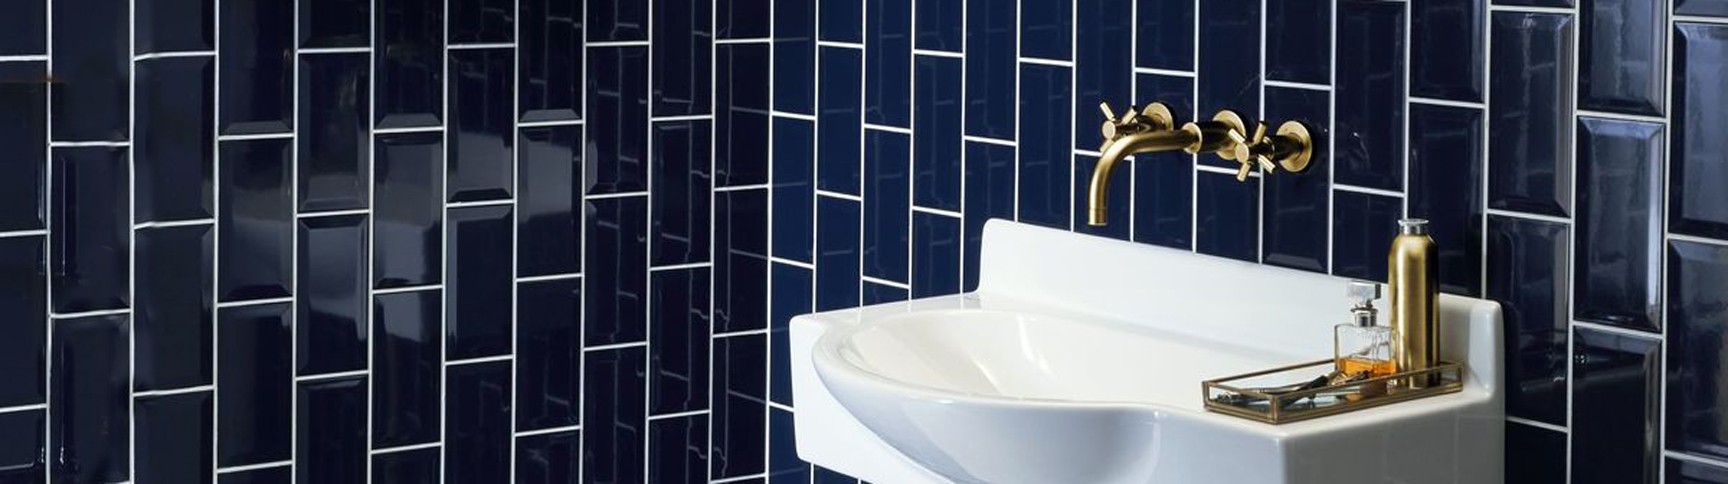 Bathroom Wall Tiles | Great Value Prices | World of Tiles